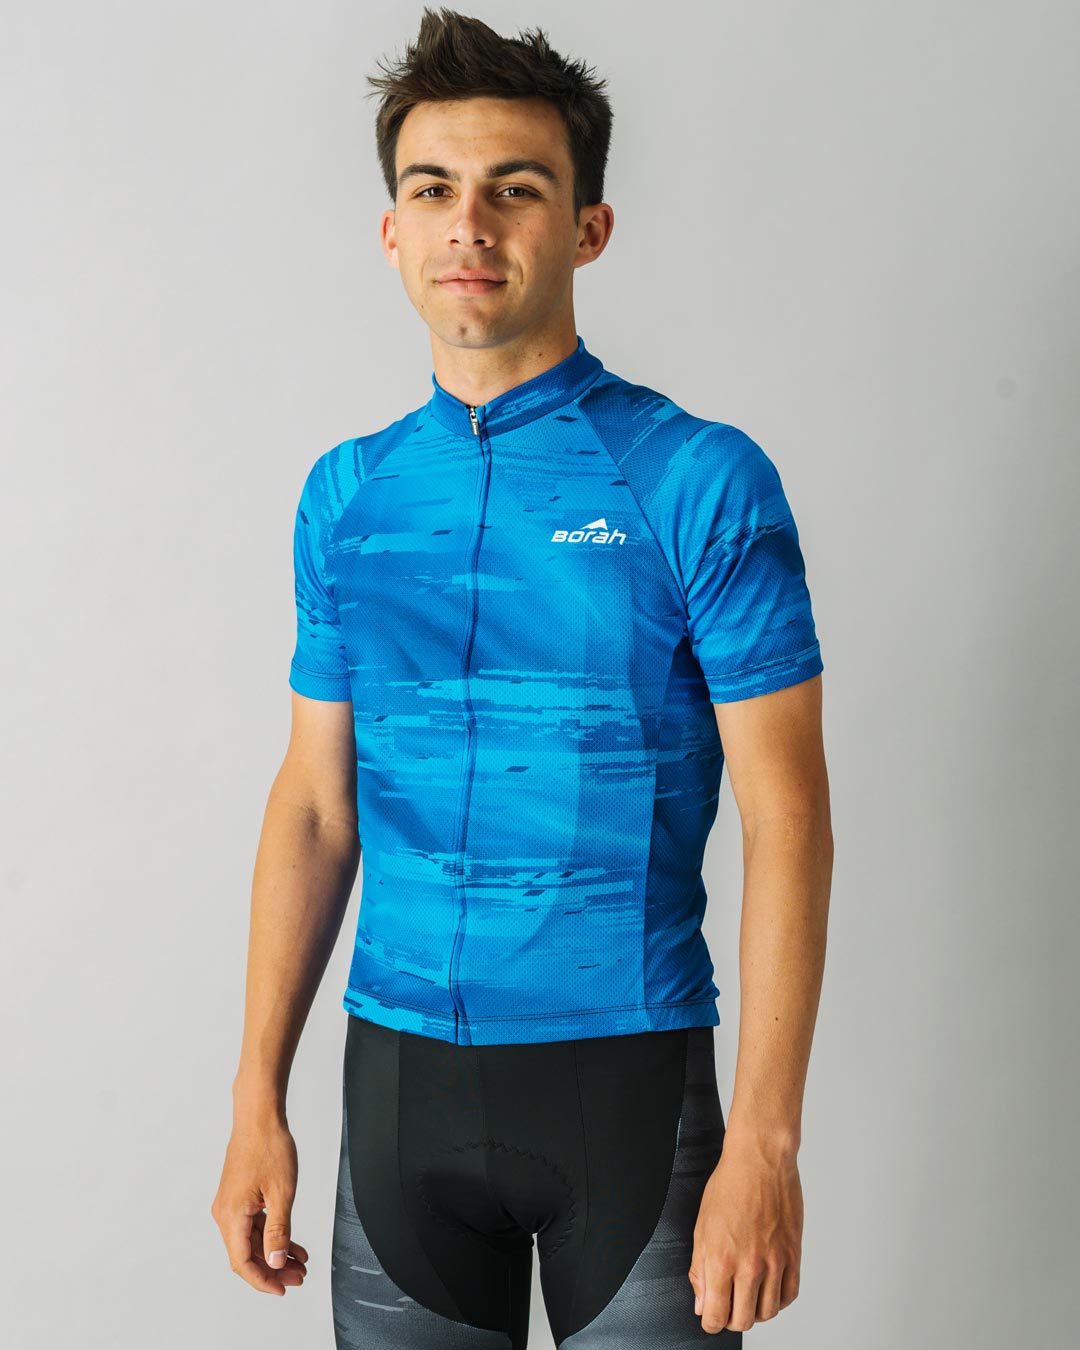 Pro Cycling Jersey, Custom Jersey, Made in the USA